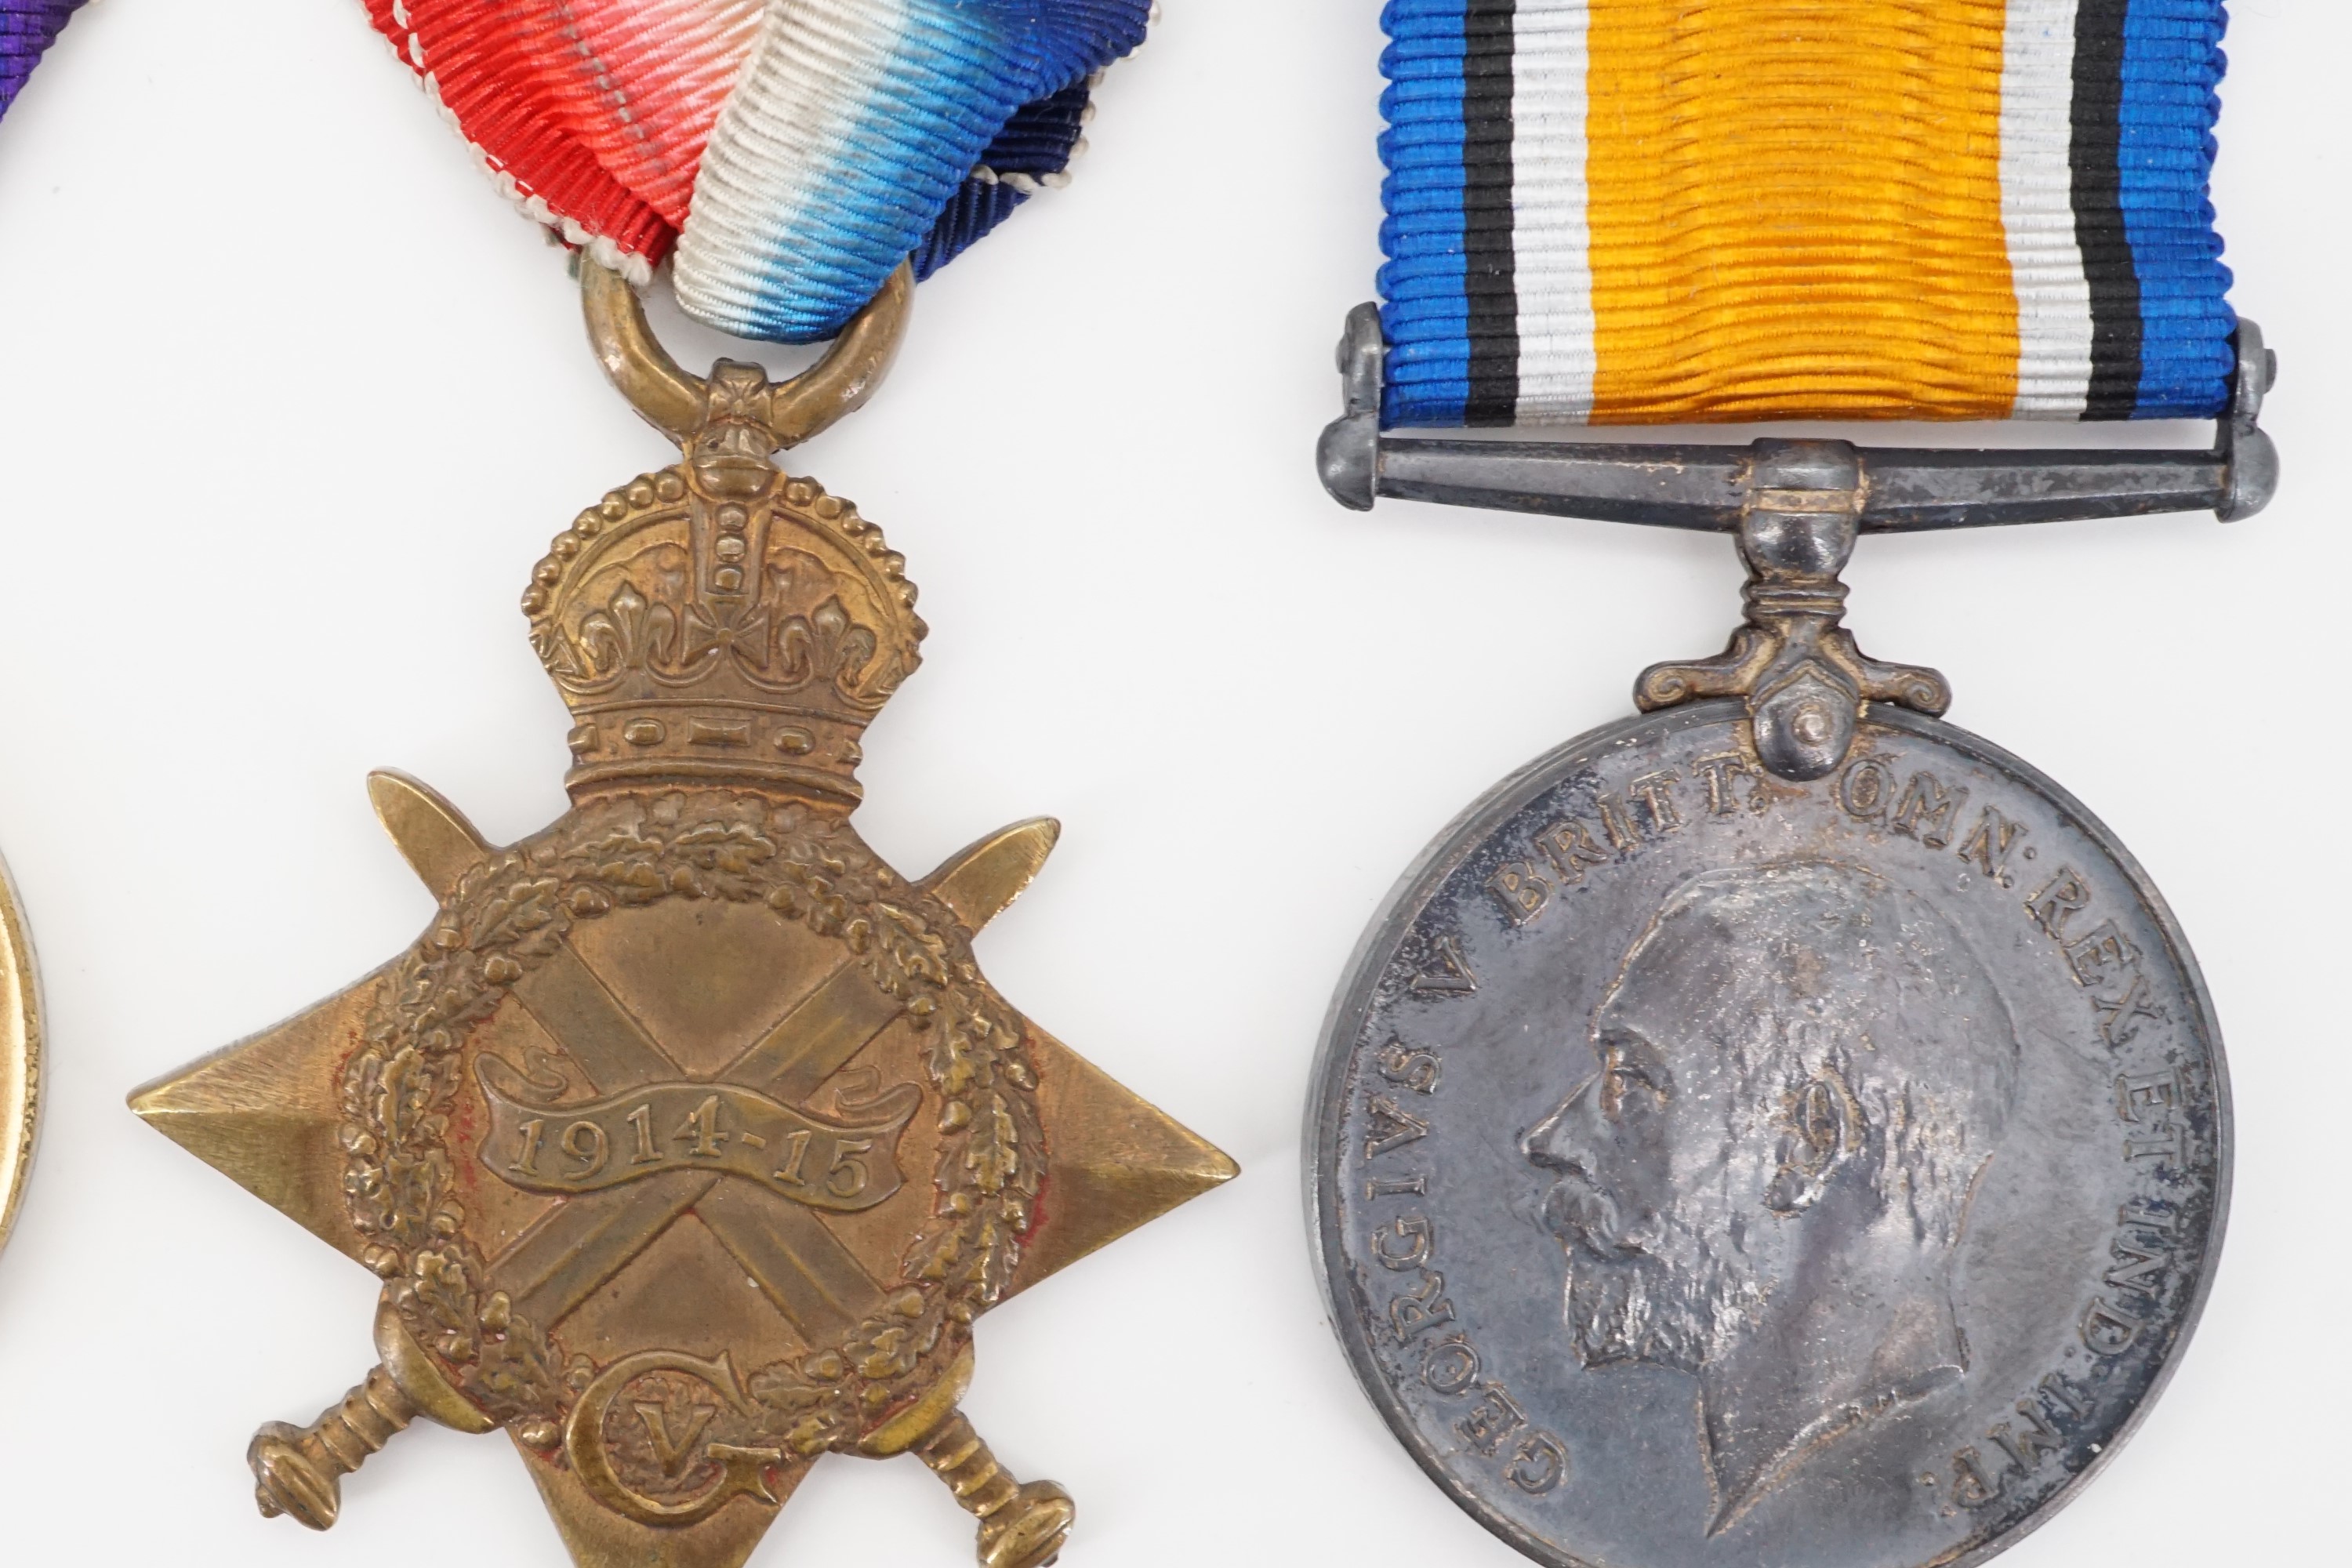 1914-15 Star, British War and Victory medals to 60554, Dvr W H Bolton, RE, with issue documents etc - Image 3 of 7